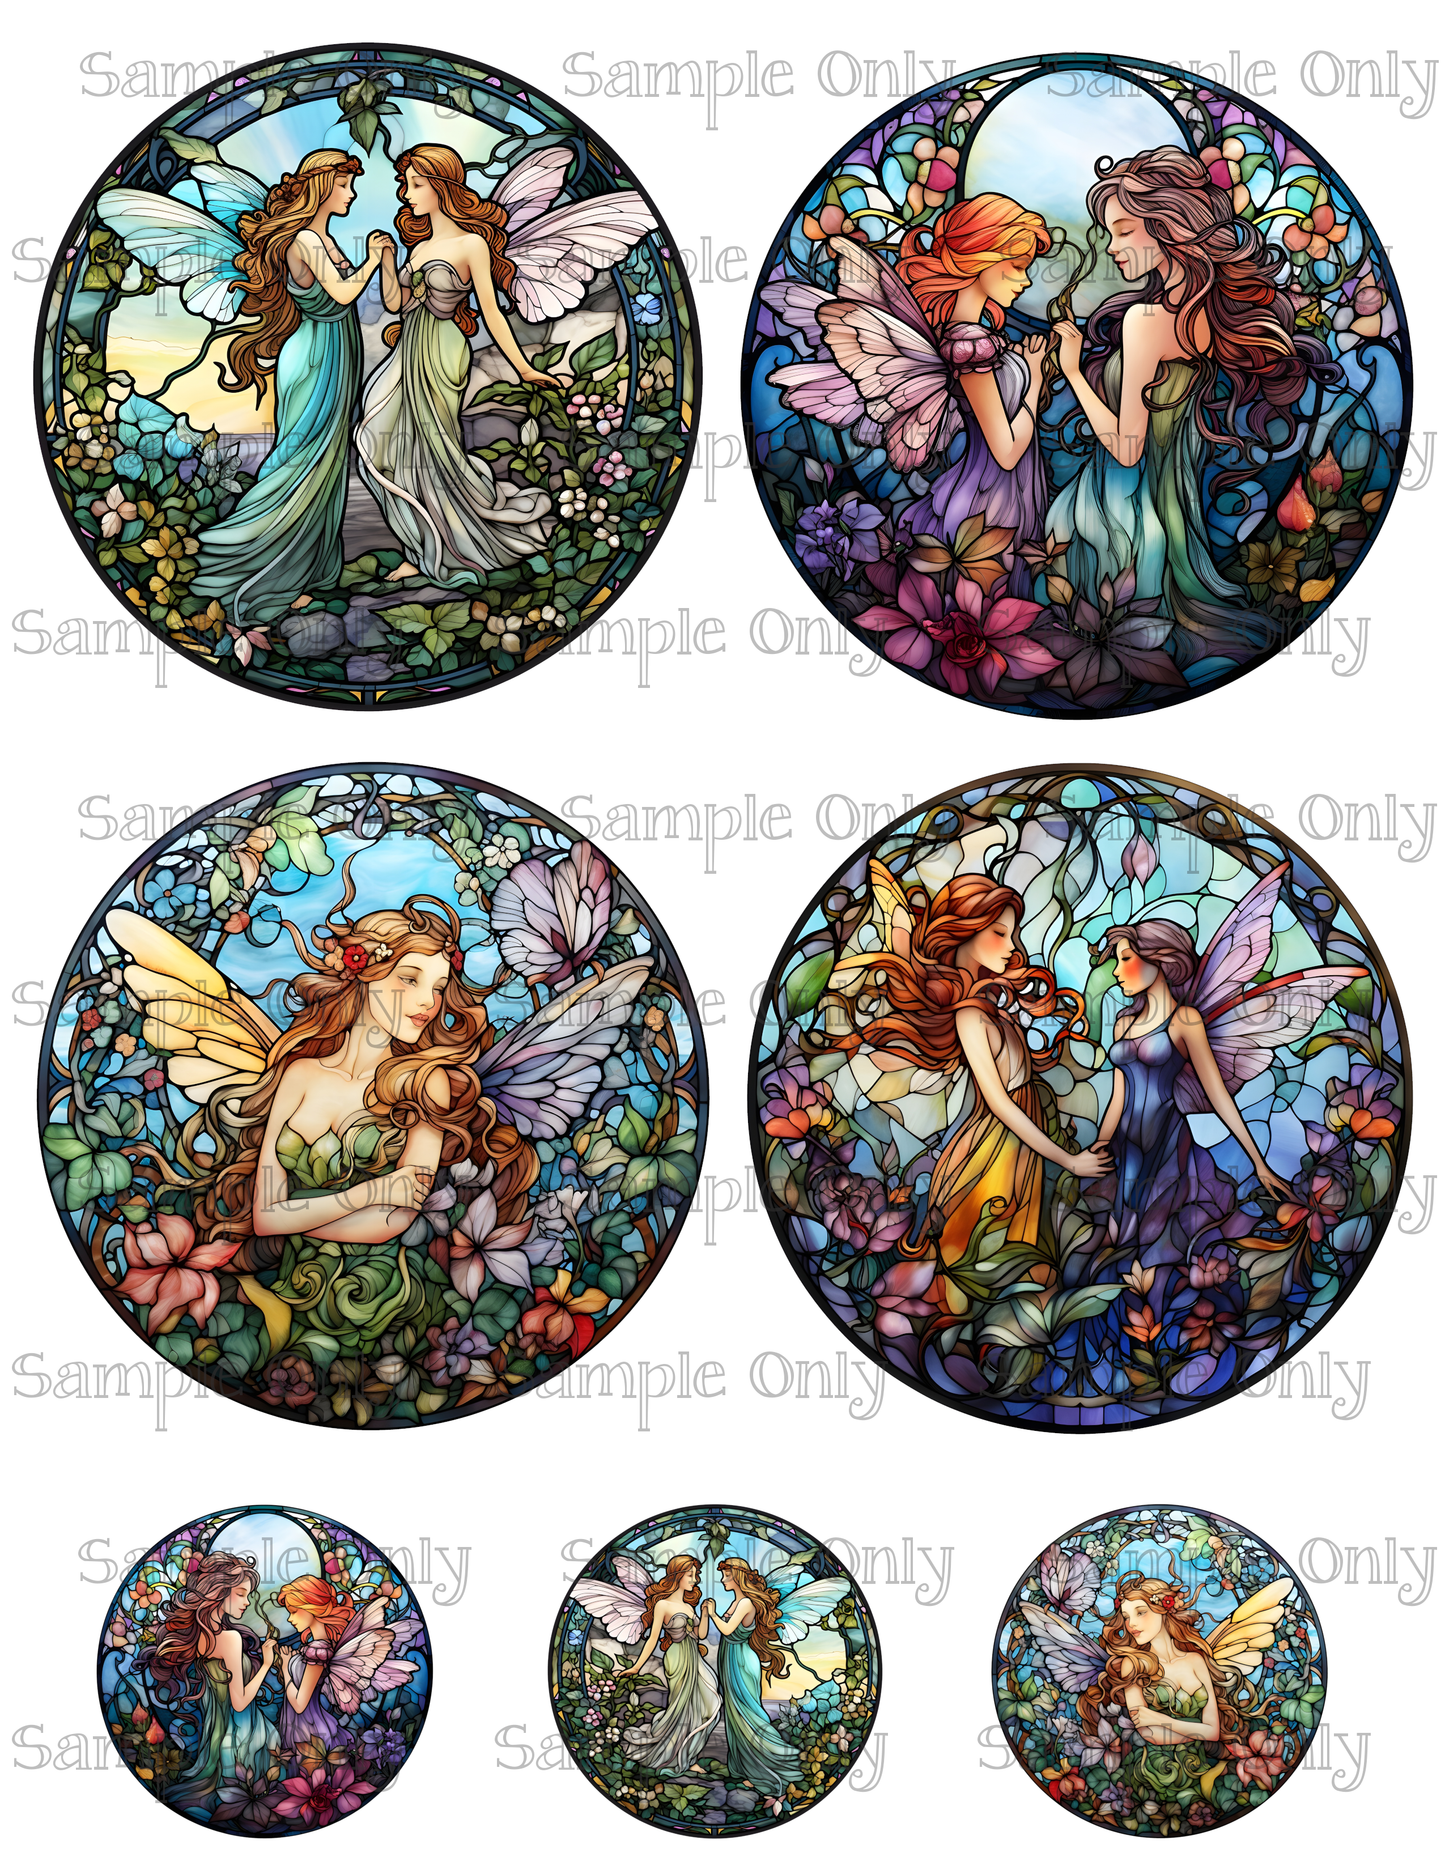 4 Inch Stained Glass Fairy Image Sheet For Polymer Clay Transfer Decal DIGITAL FILE OR PRINTED